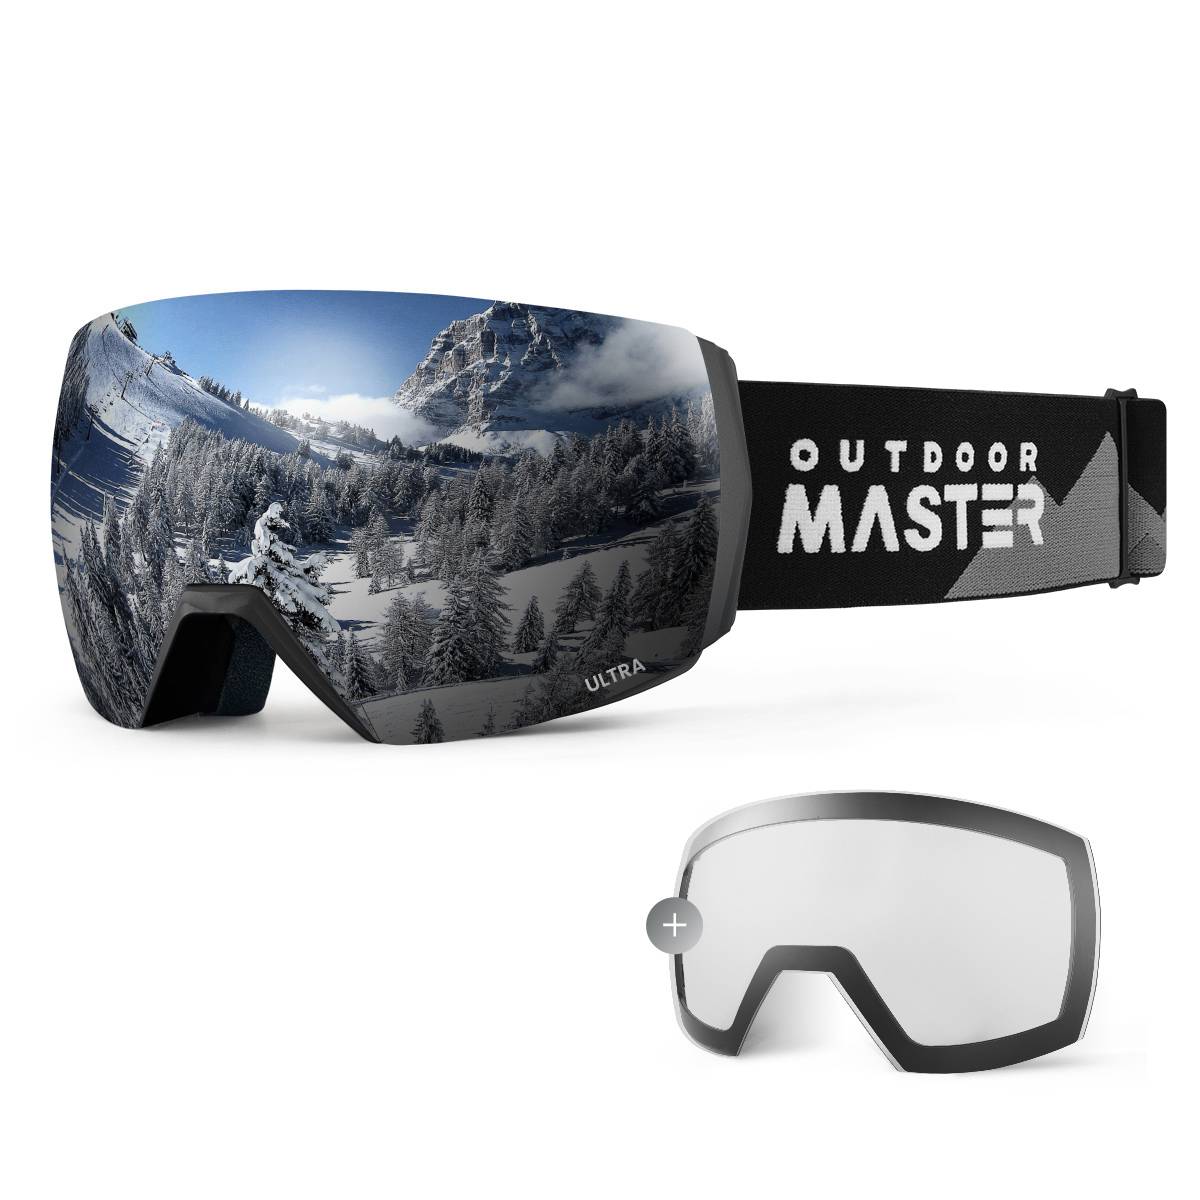 Ski goggle strap design  Other clothing or merchandise contest